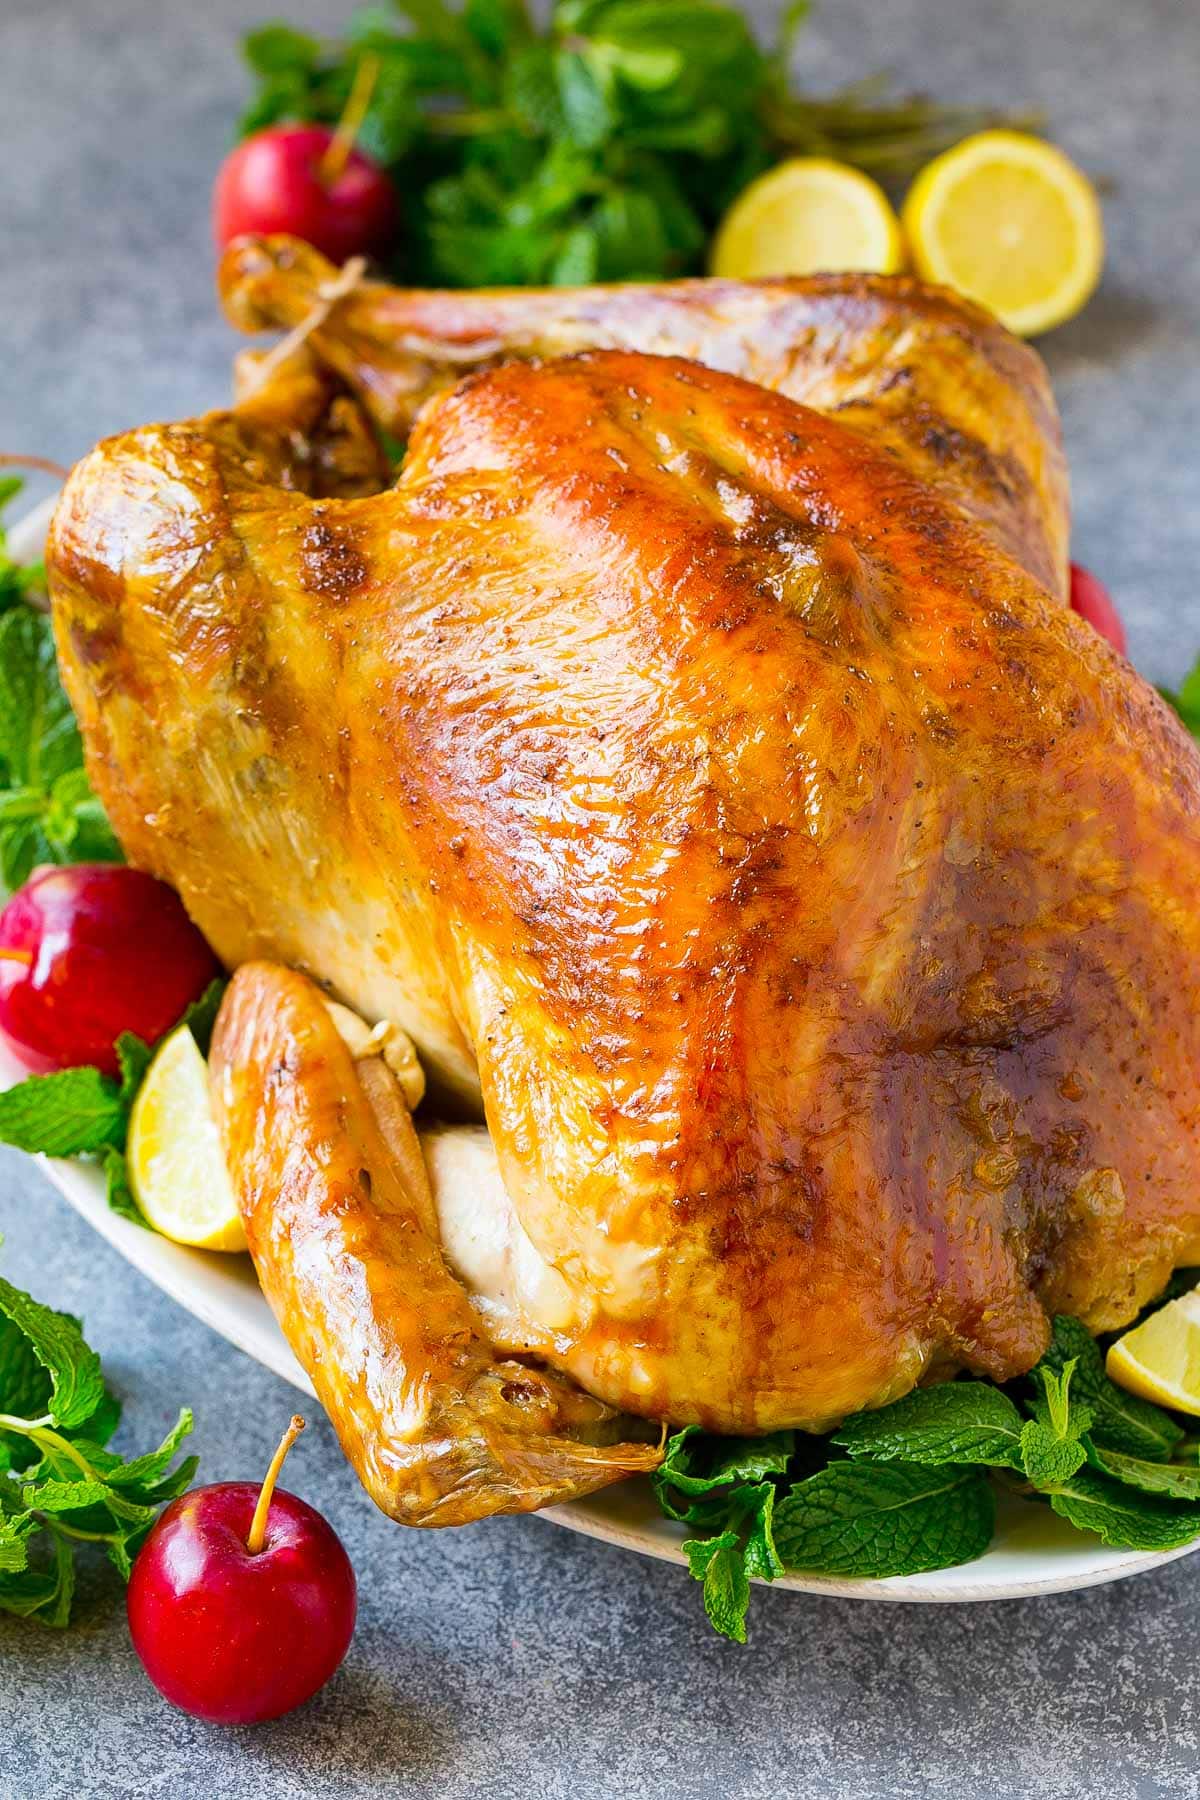 A cooked turkey made with turkey brine.